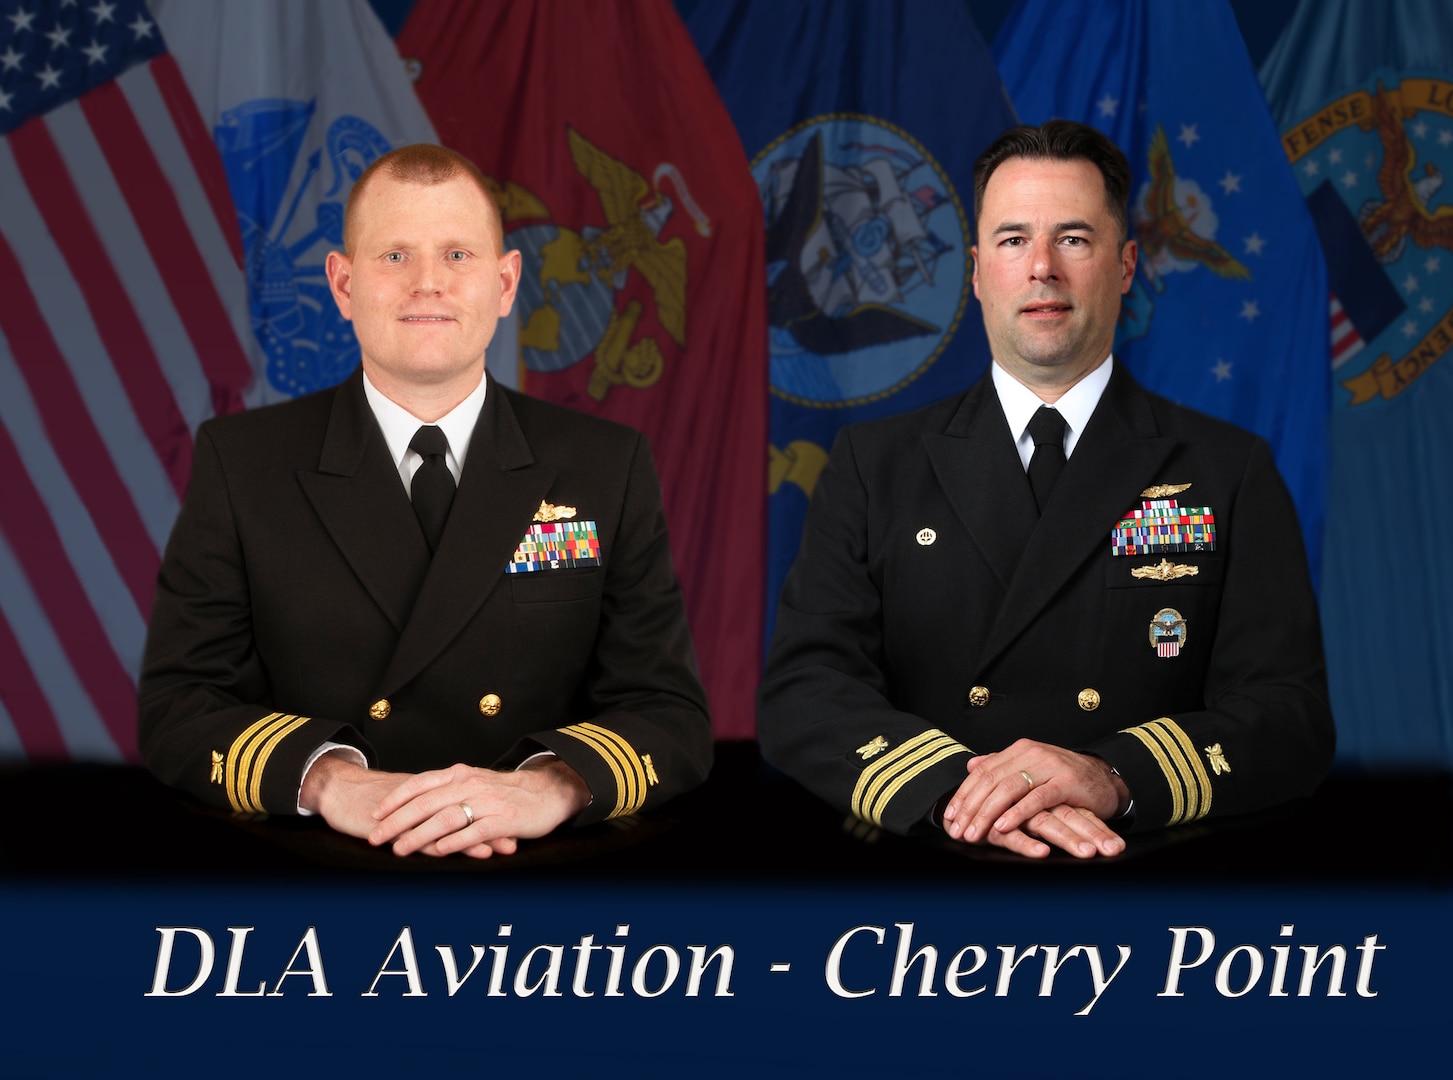 DLA Aviation Cherry Point photo incoming and outgoing commanders